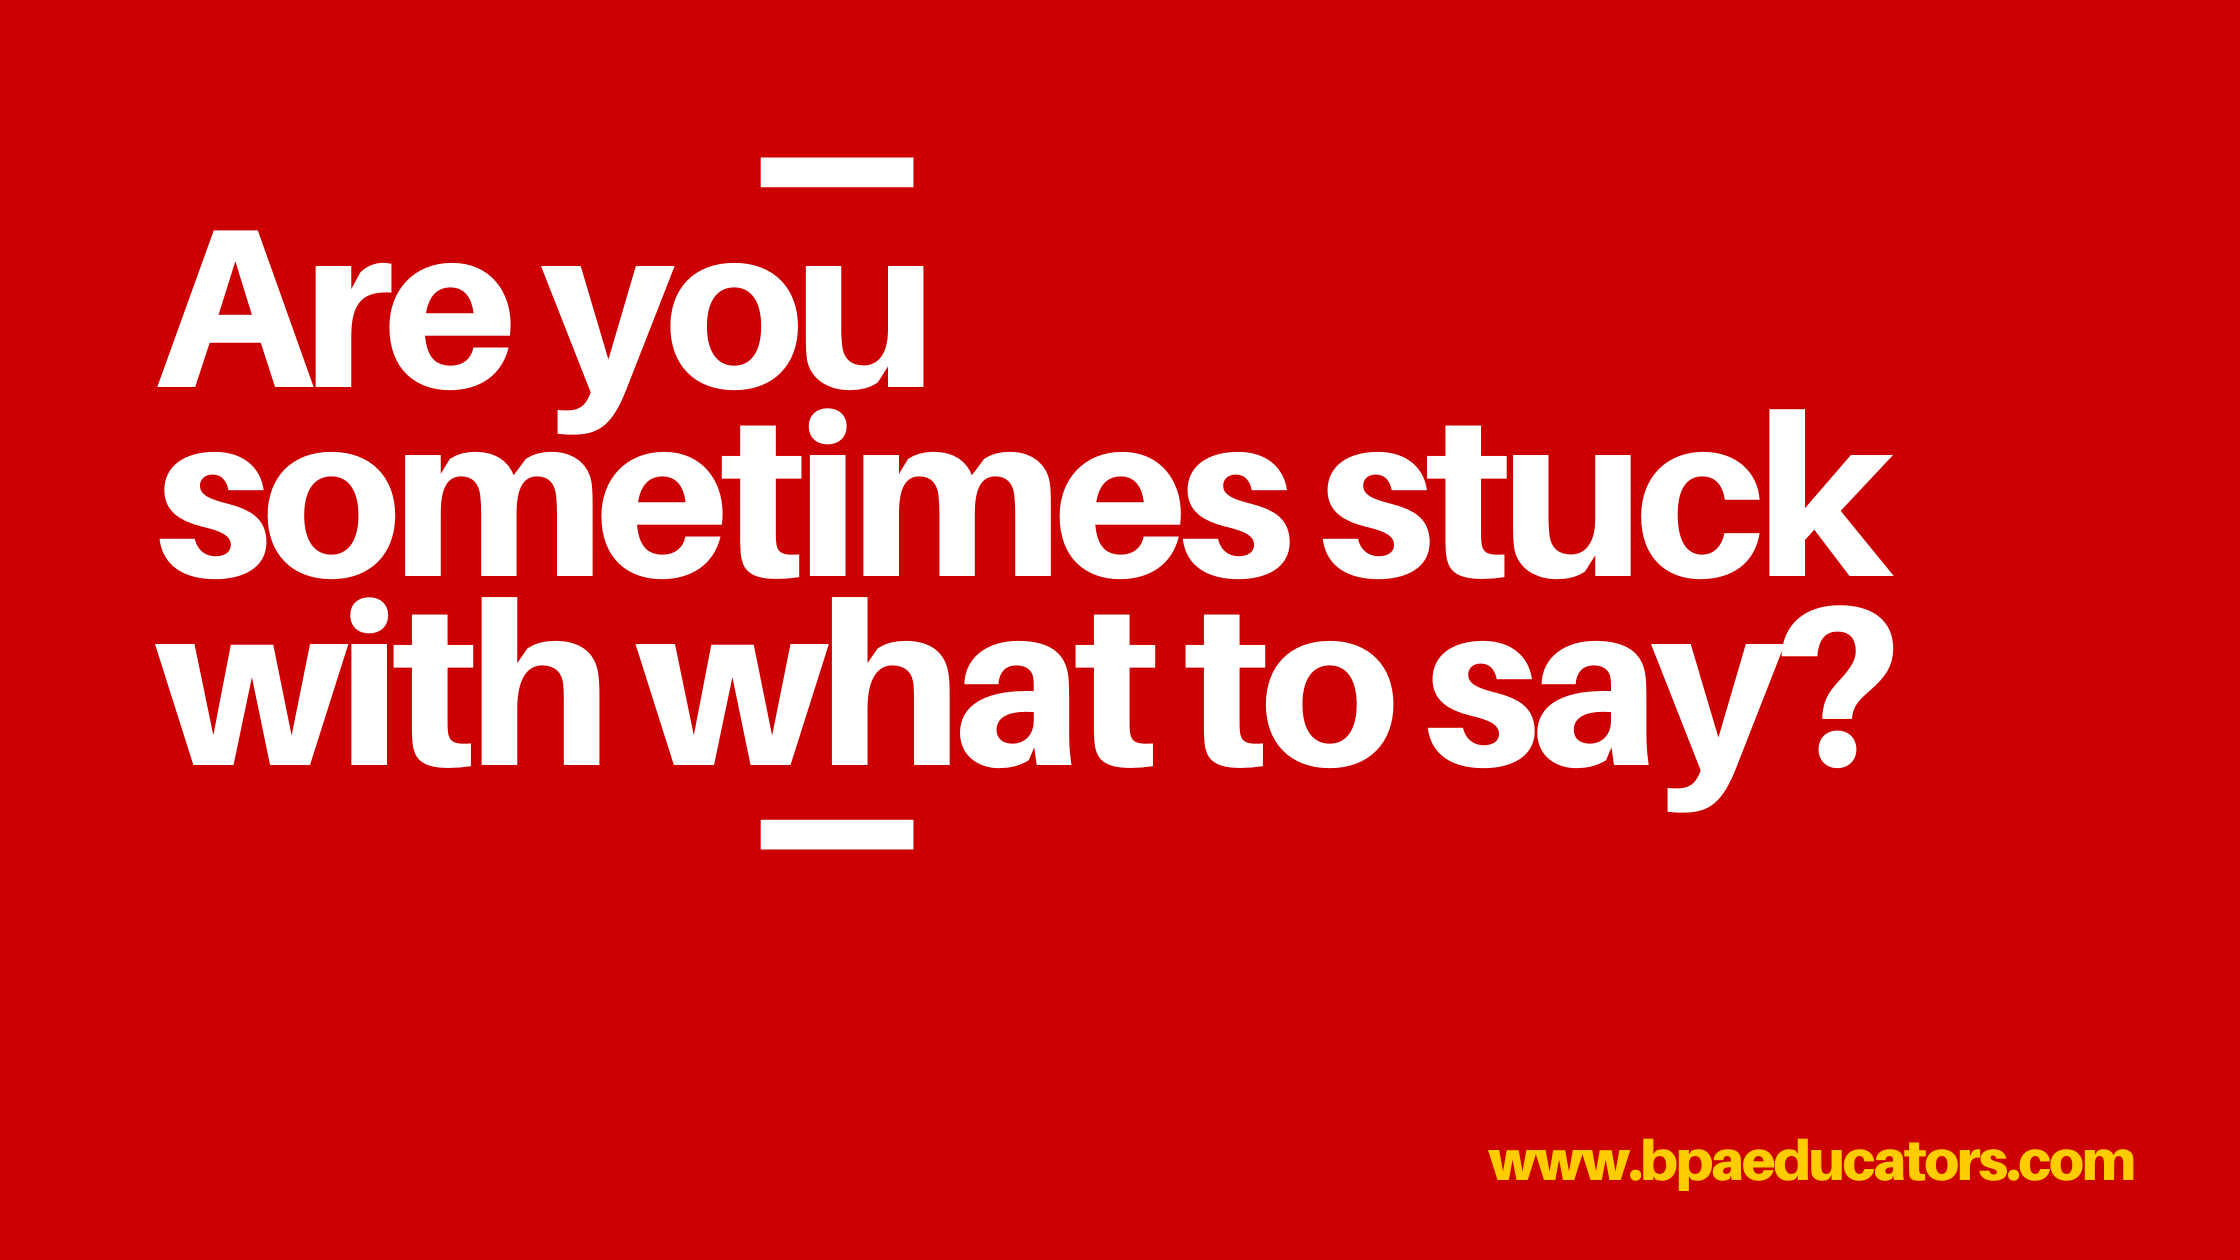 Are you sometimes stuck with what to say?